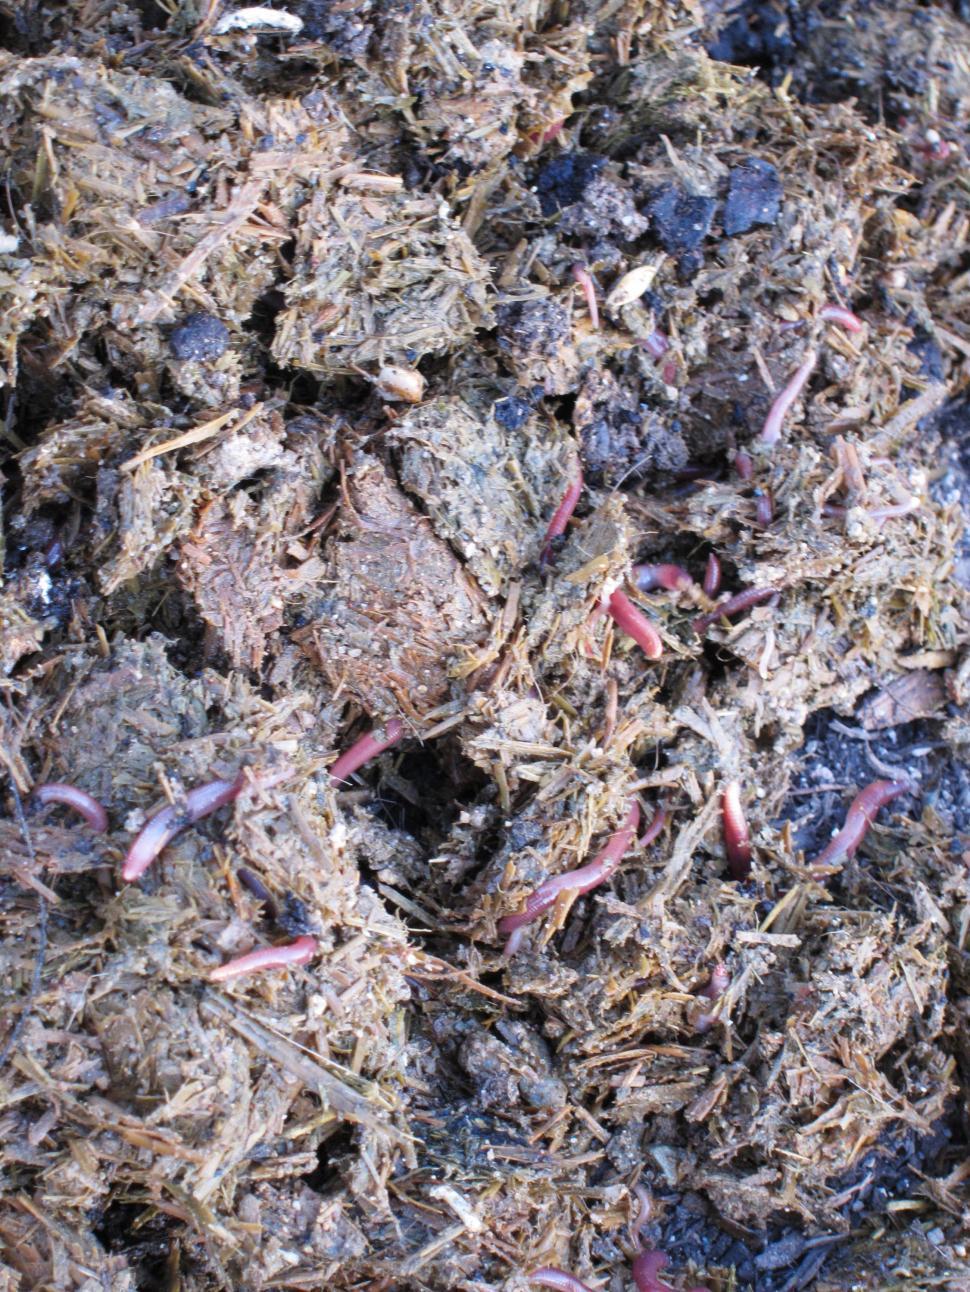 Free Image of Earthworms 